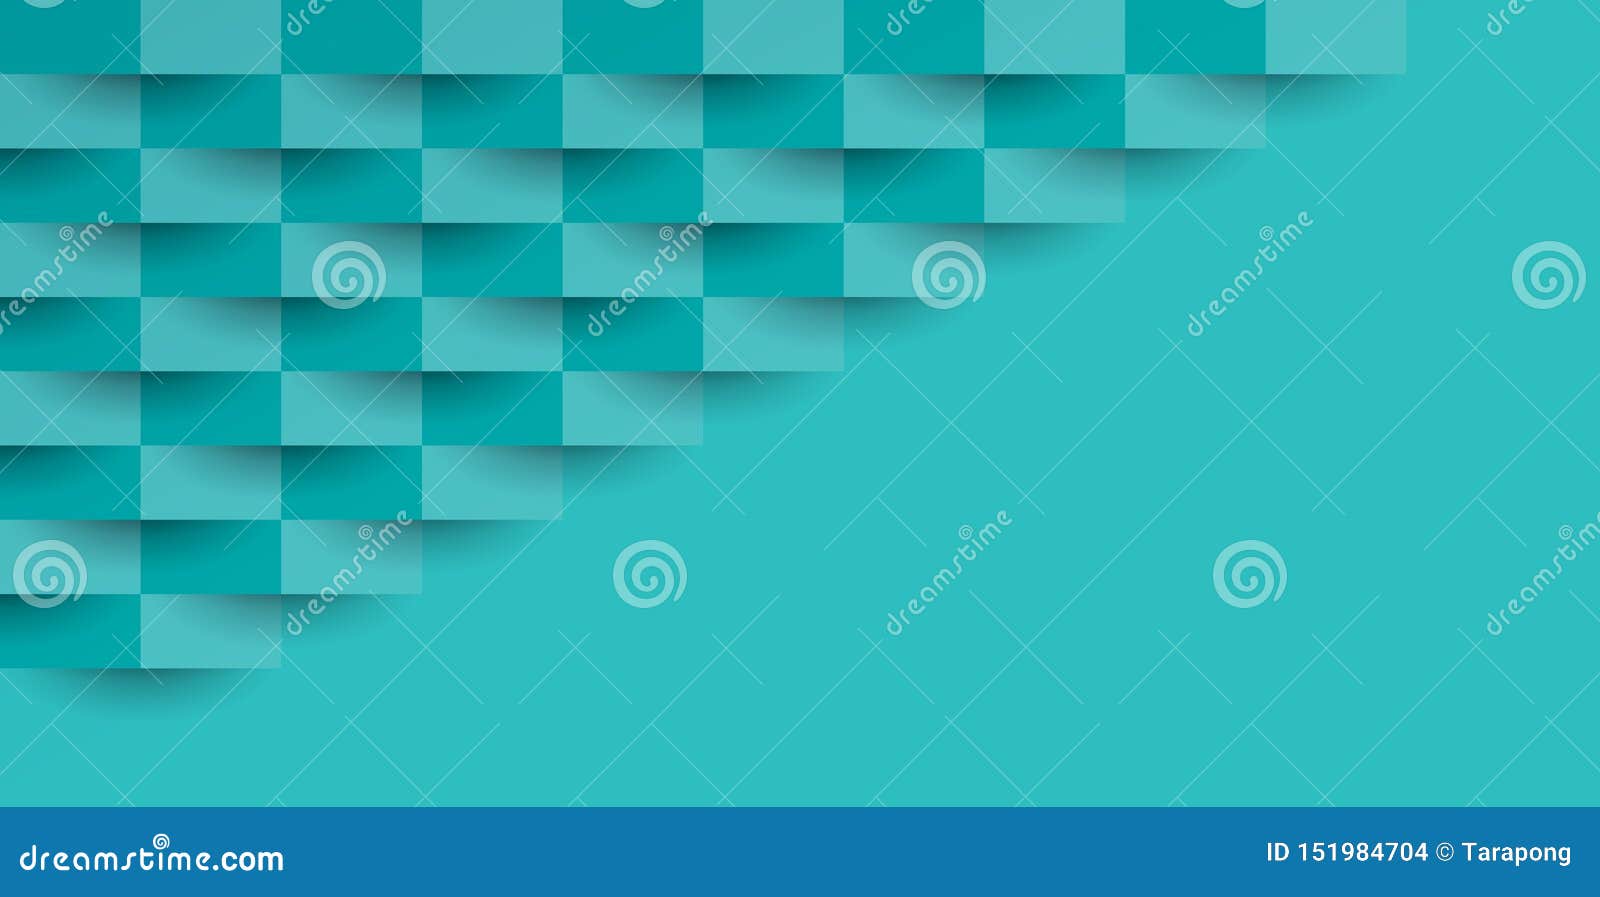 Blue Green Abstract Texture. Vector Background Can Be Used in Cover Design,  Book Design, Poster, Cd Cover, Website Backgrounds. Stock Vector -  Illustration of concept, abstraction: 151984704